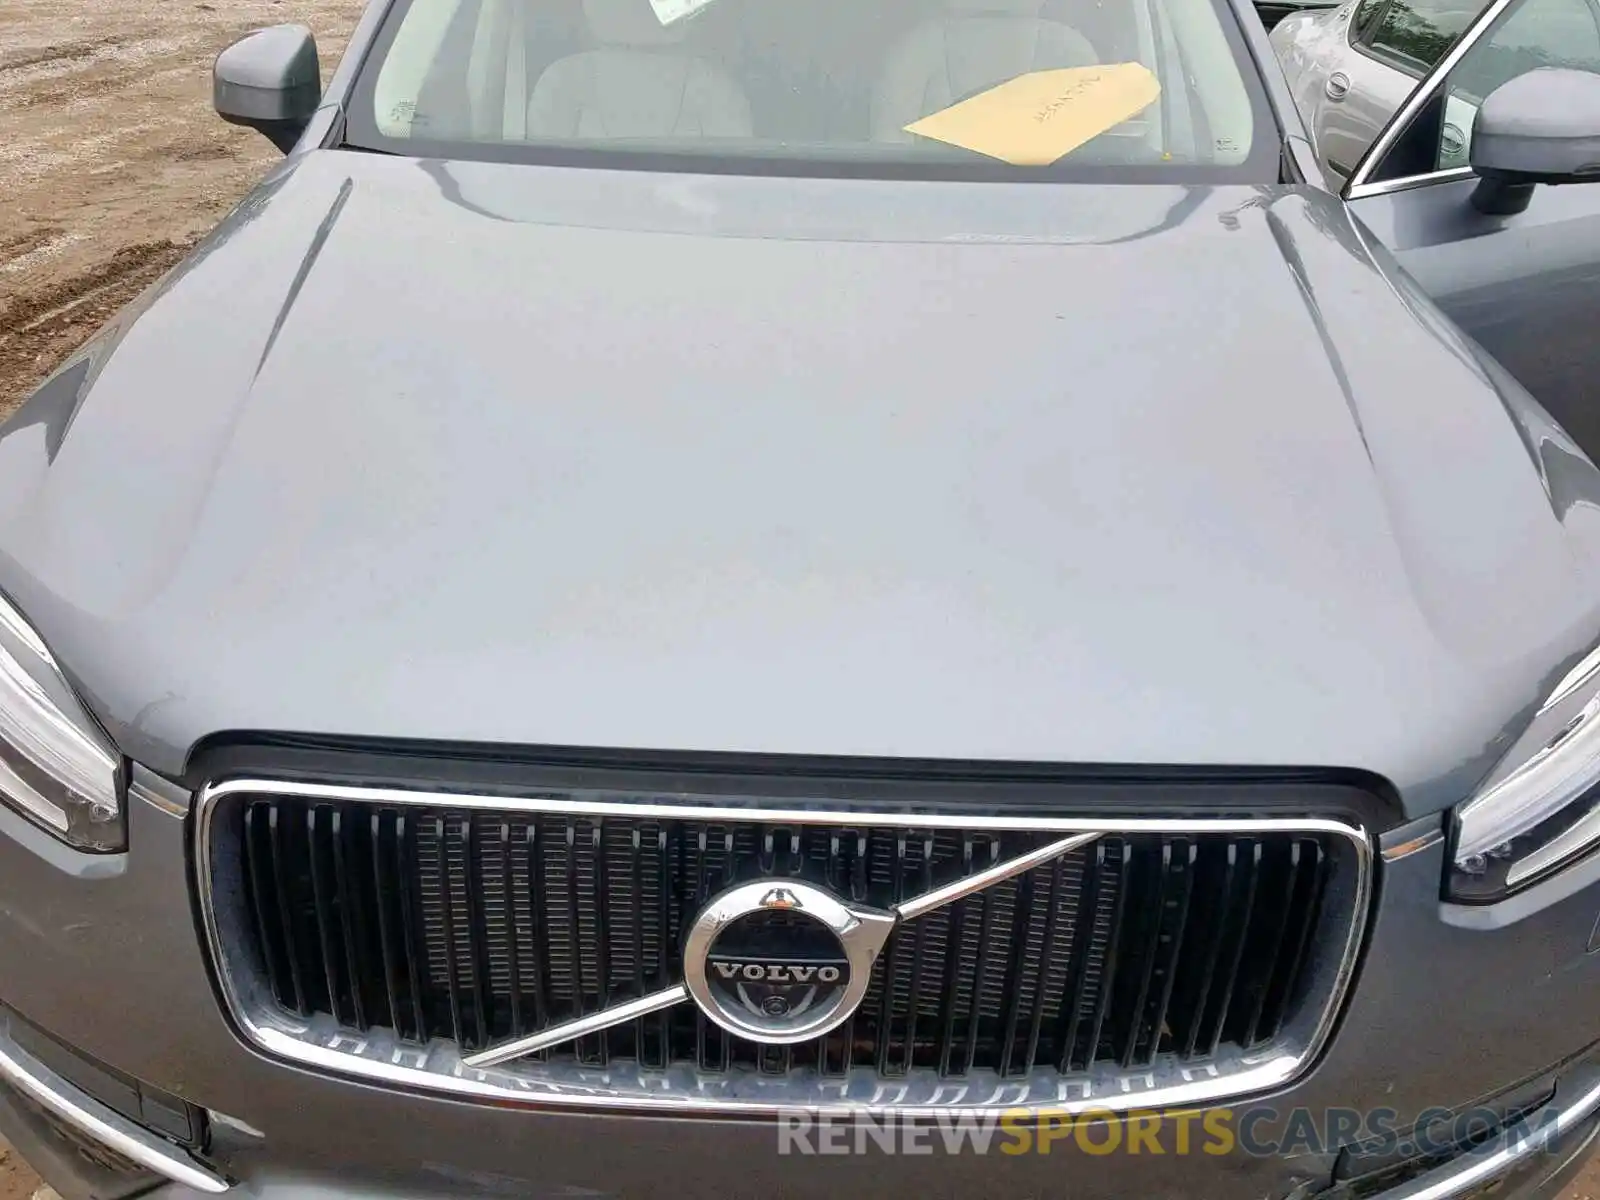 7 Photograph of a damaged car YV4A22PK8K1424604 VOLVO XC90 T6 2019